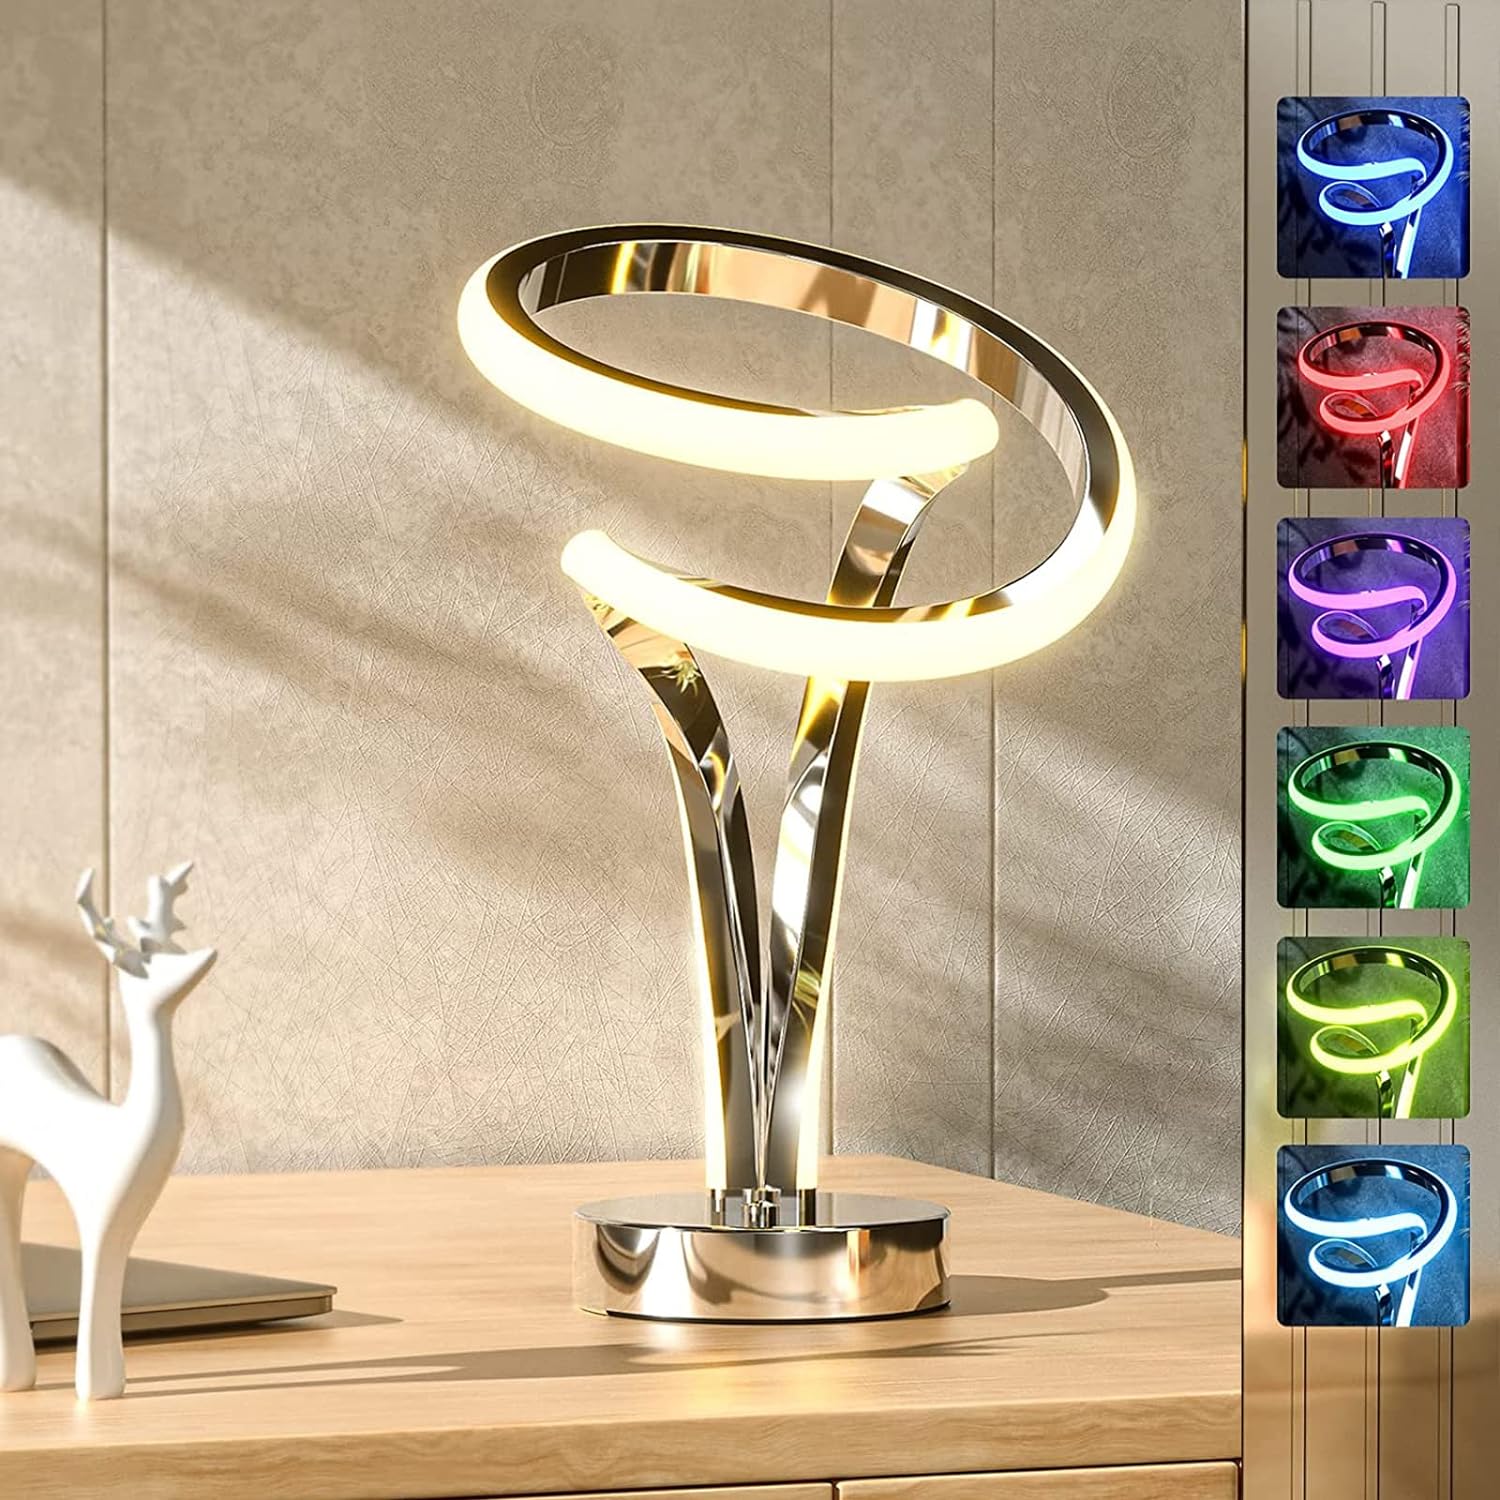 Modern Spiral RGB Table Lamp, Touch Dimmable LED Nightstand Lamp, 10 Light Modes Bedroom/Unique Lamps for Home Decor Living Room Bedroom Office, Cool Lamps for Ideal Gift, Silver